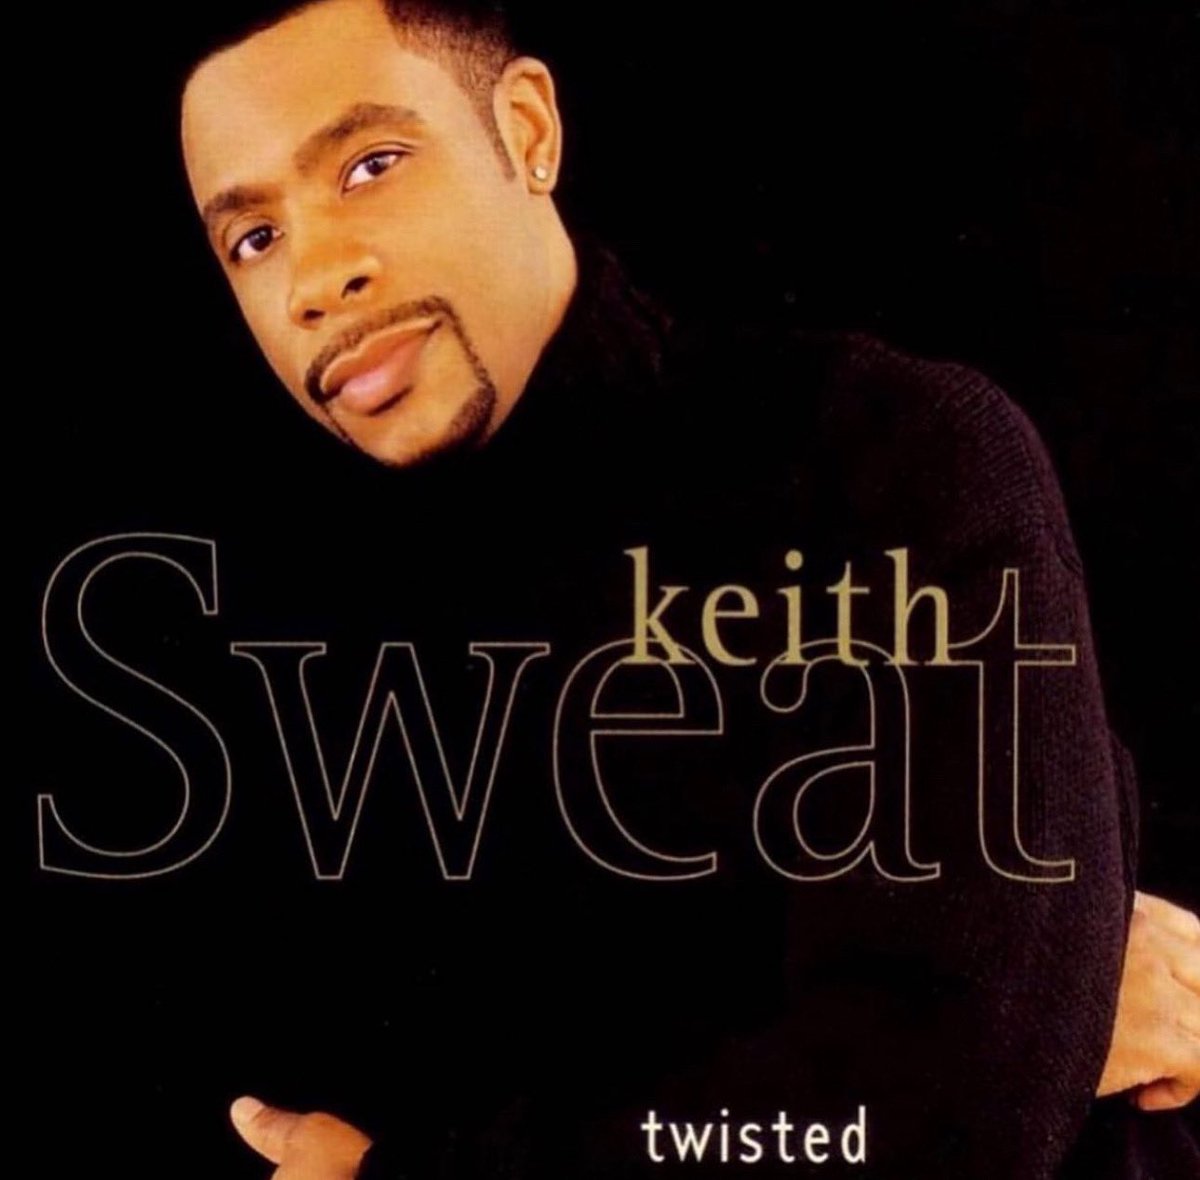 27 years ago today, @OGKeithSweat released Twisted as the lead single off his self-titled 3rd album under @ElektraRecords instagram.com/p/CtE73uWLsST/